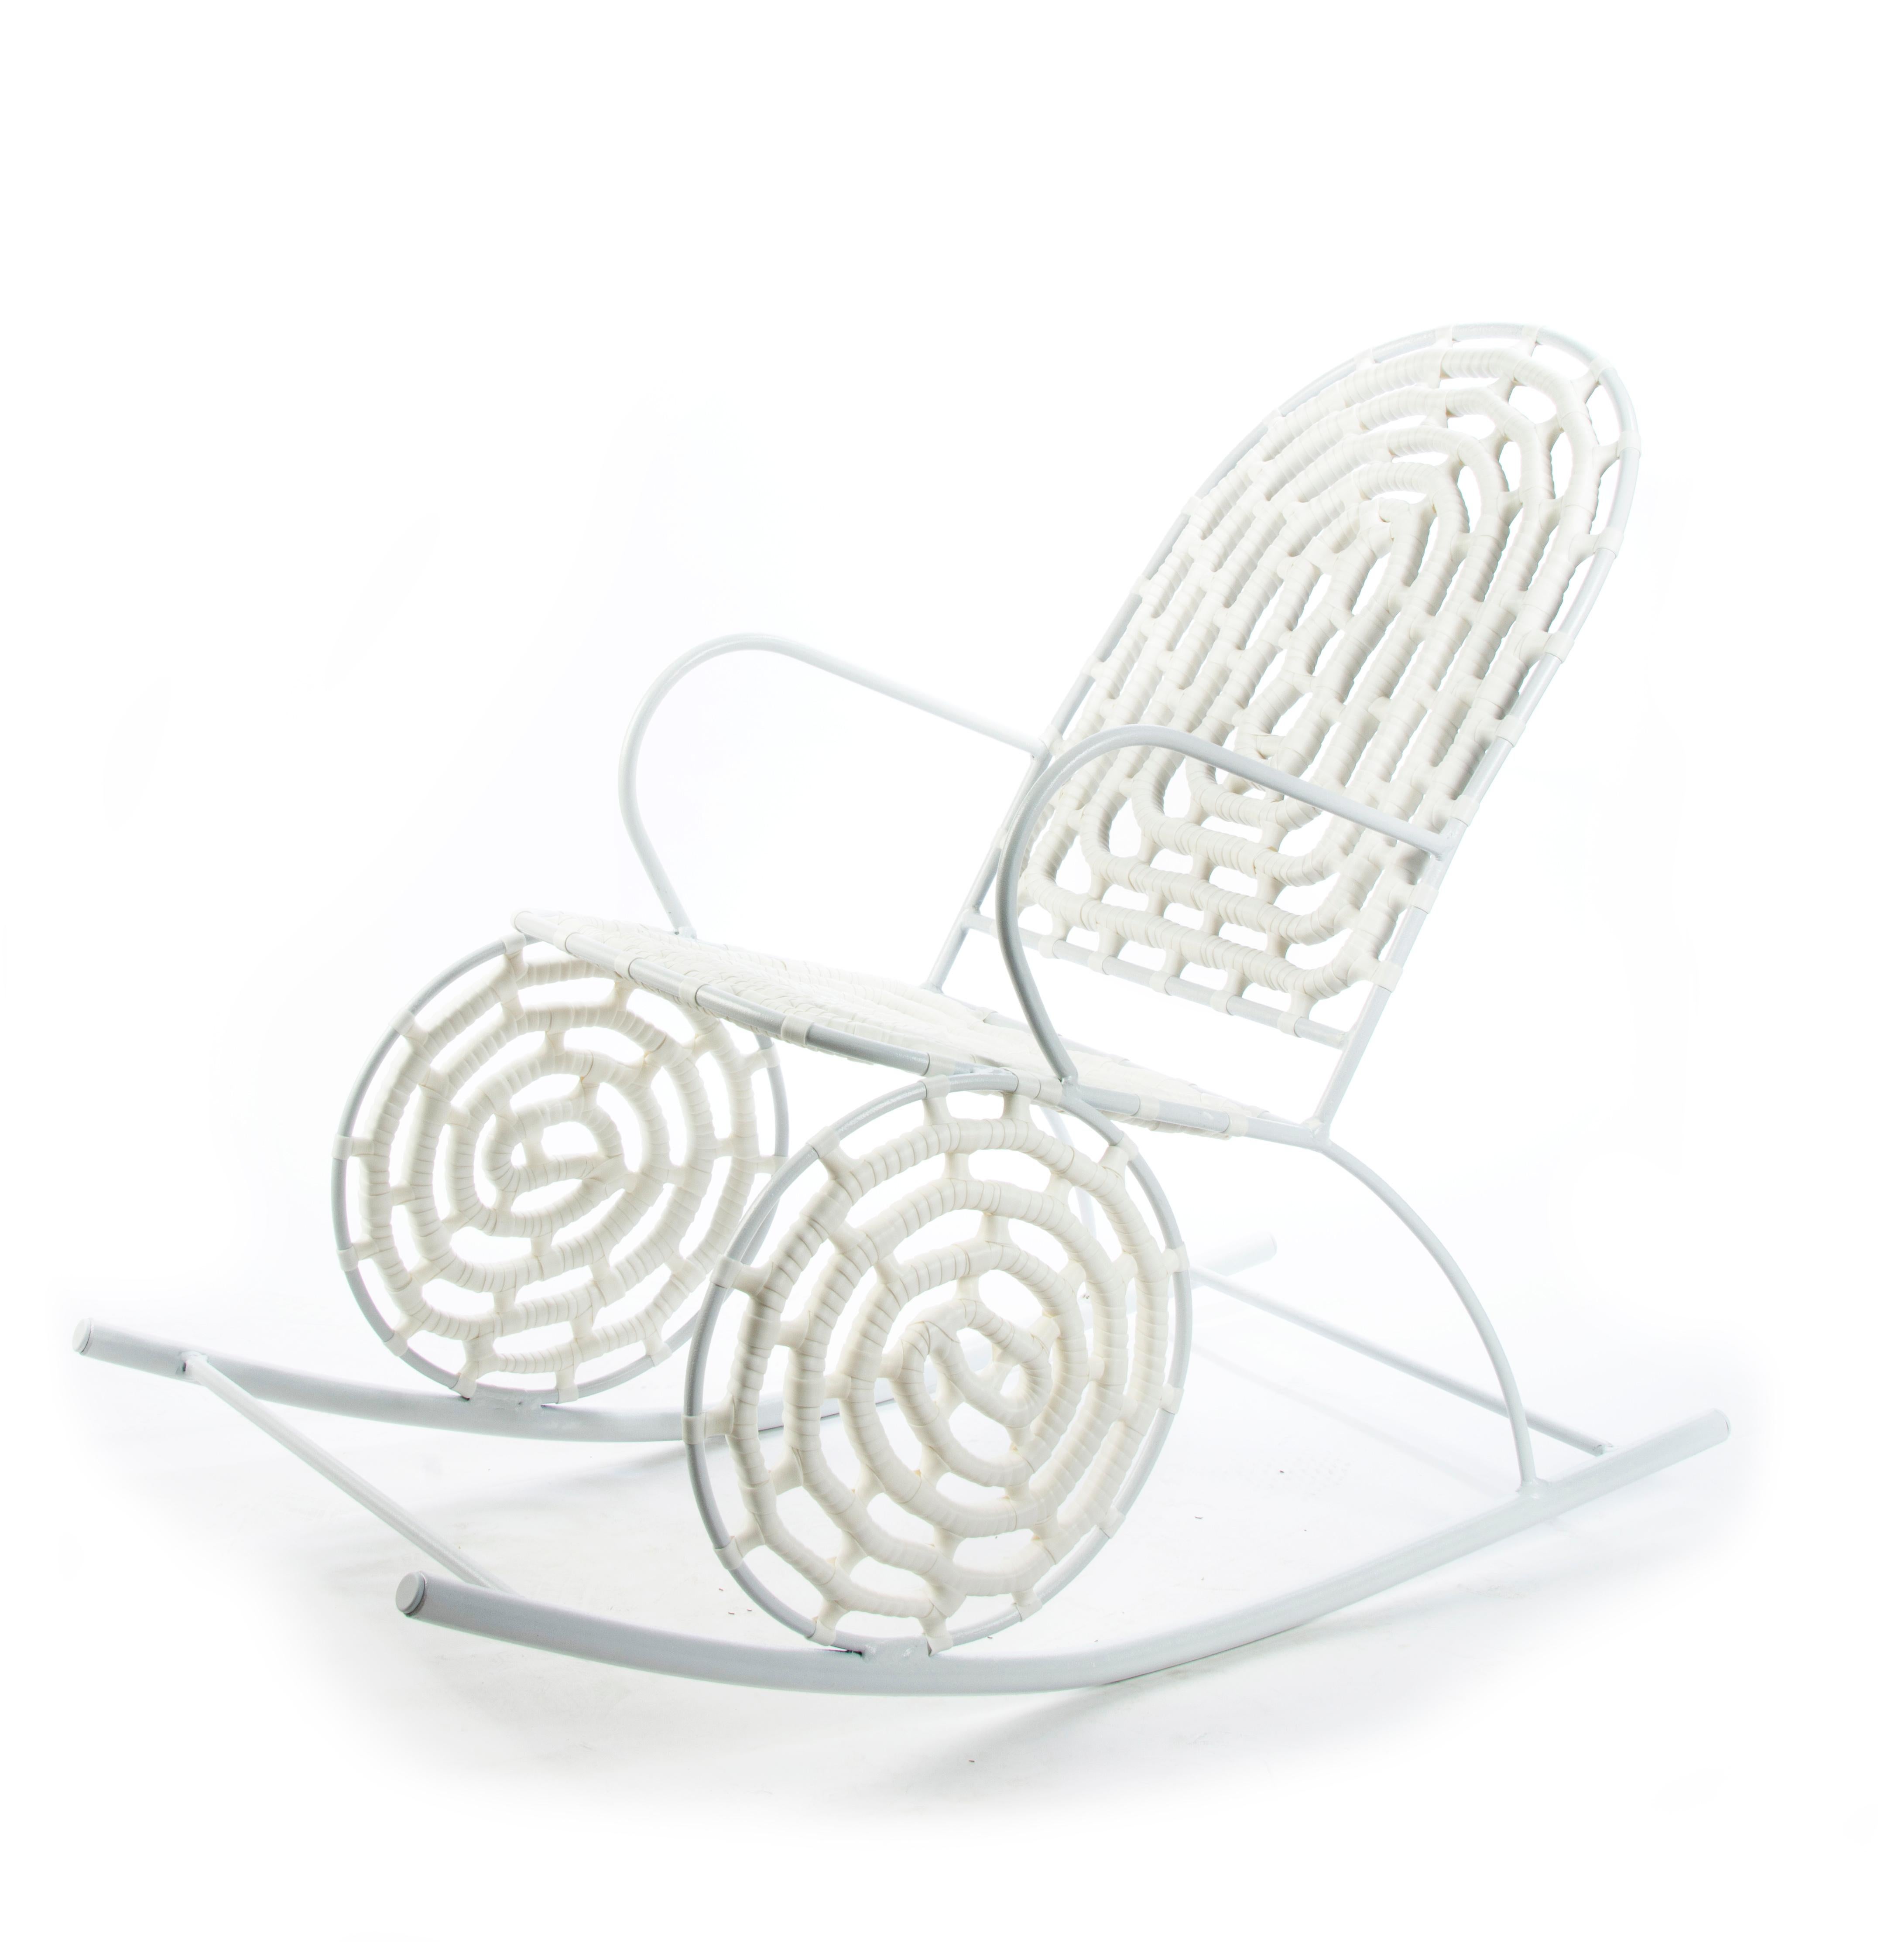 South African Rock-A-Bye Baby Chair, 1 of 1 by Nawaaz Saldulker